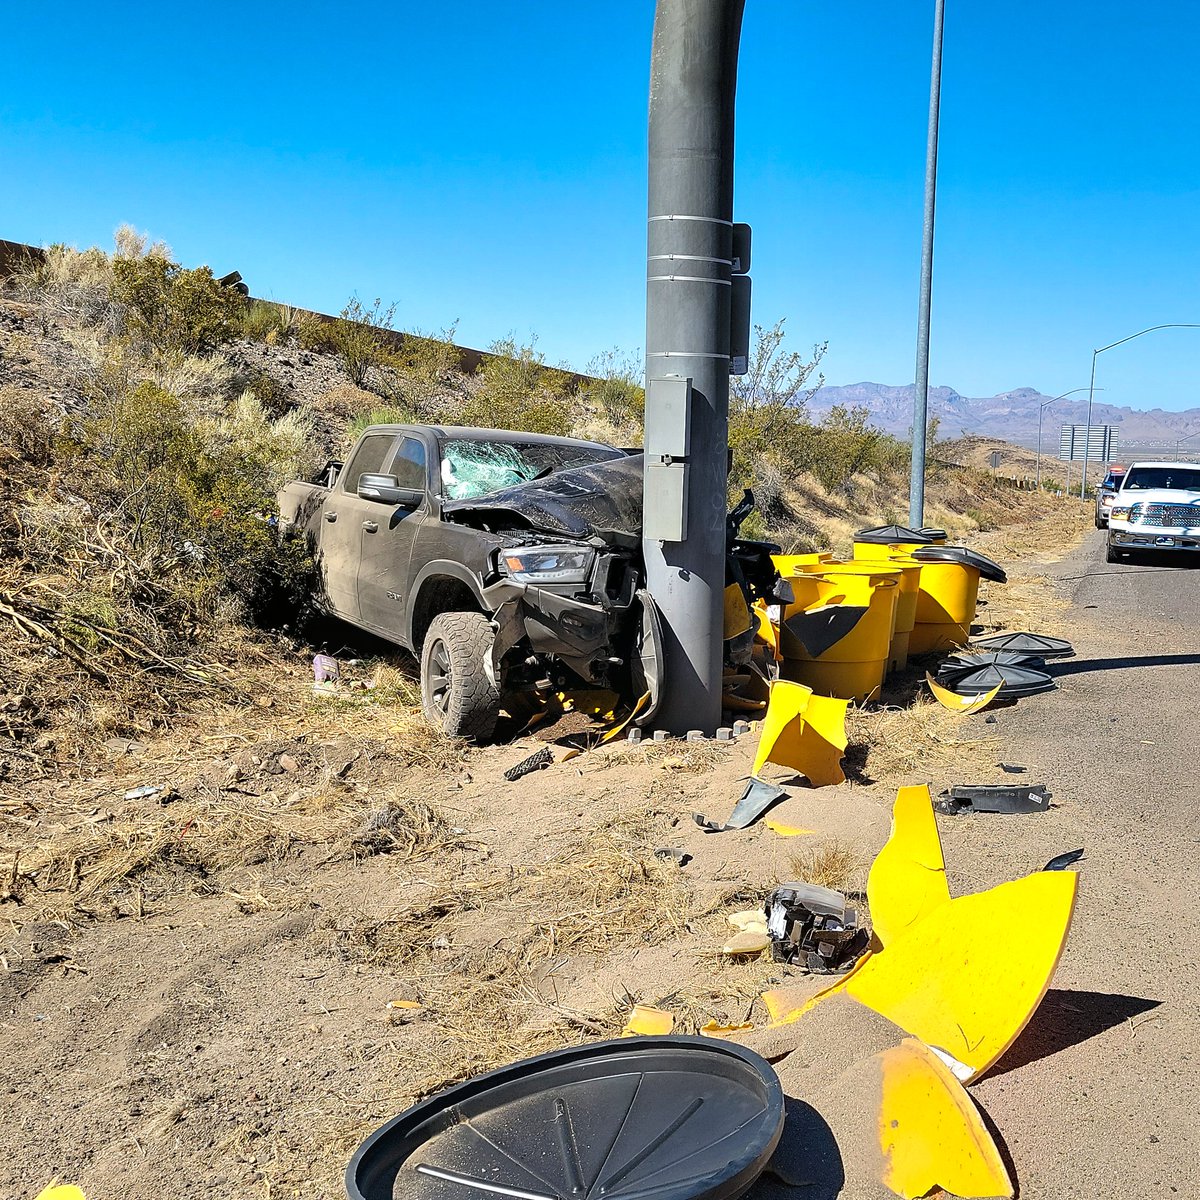 📢 Reminder: #DriveAlert + #BuckleUp! 📢
Being drowsy delays reaction speed, reduces your ability to concentrate & impairs your judgment. This sleepy driver crashed on SR 68 in Golden Valley last week, but was wearing his seat belt & sustained non-life-threatening injuries.